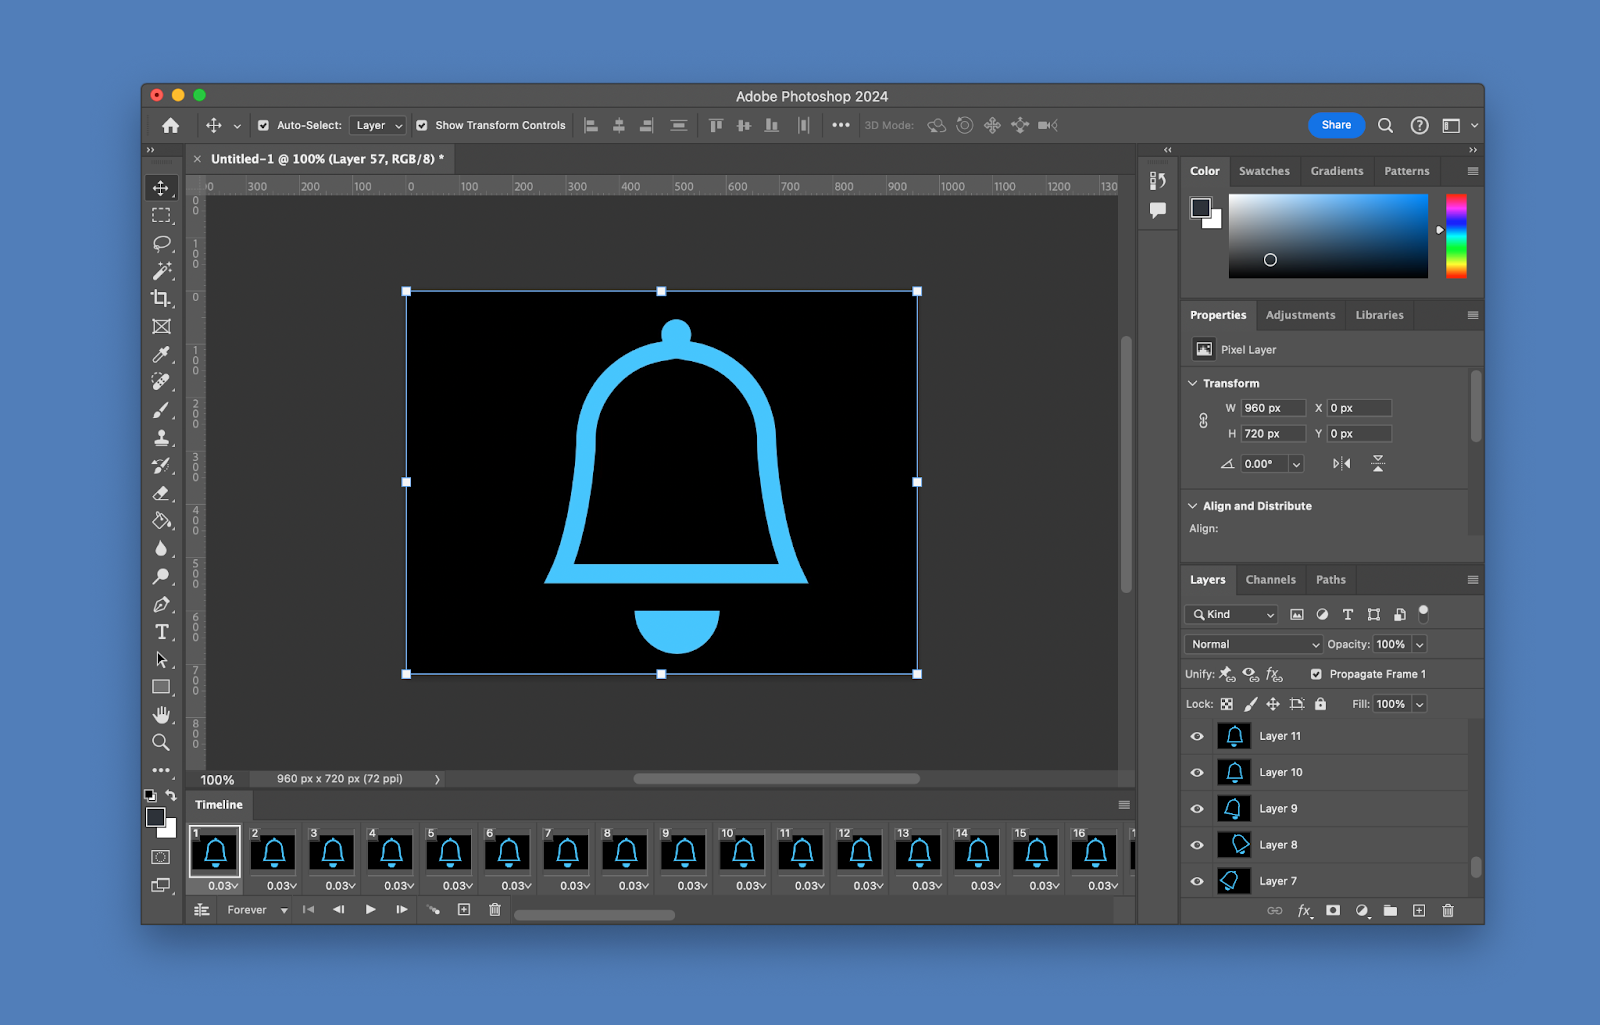 Image of Adobe Photoshop GIF process using frames and layers.